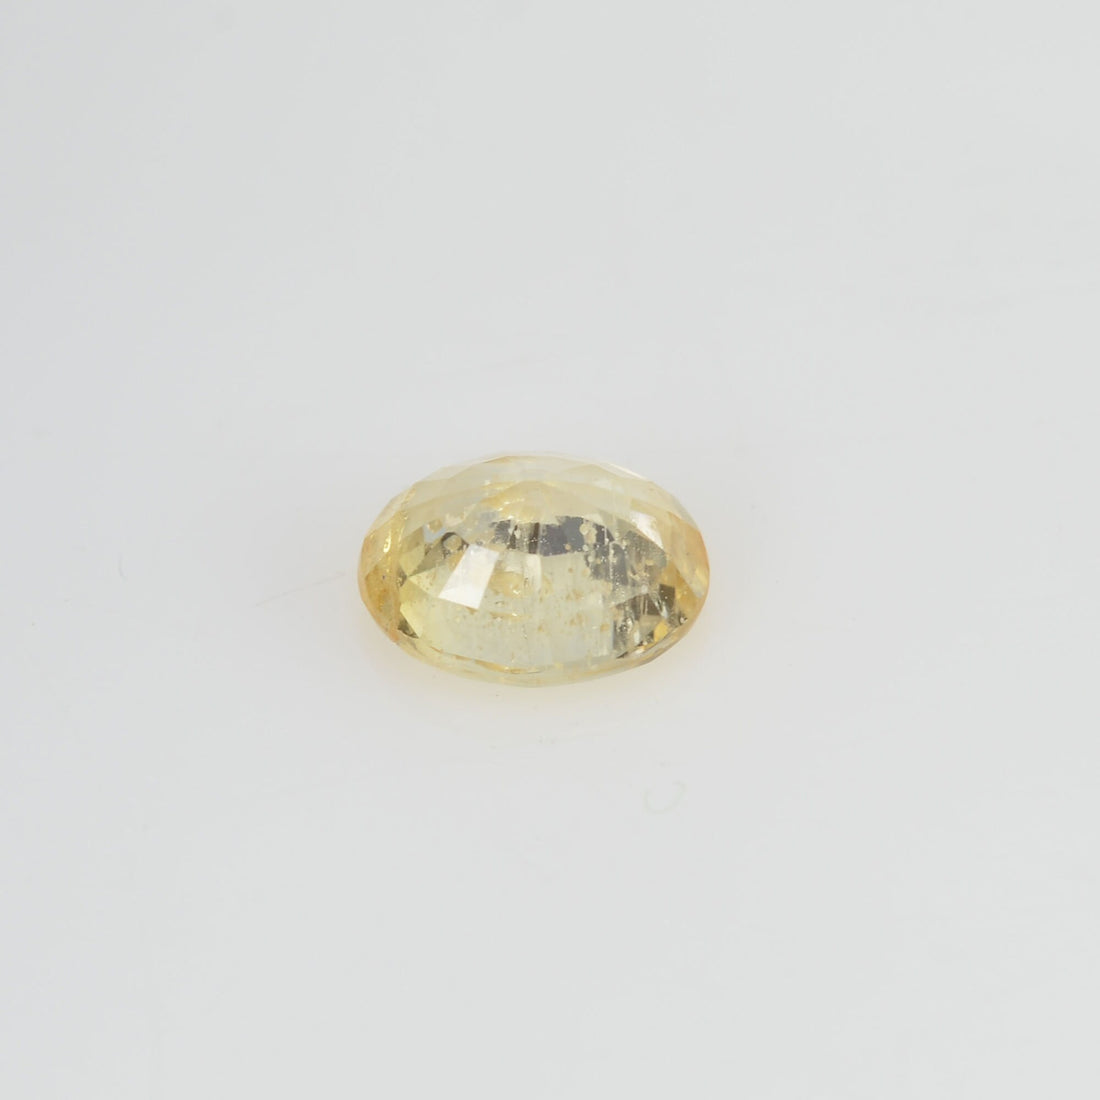 0.81 cts Natural Yellow Sapphire Loose Gemstone Oval Cut